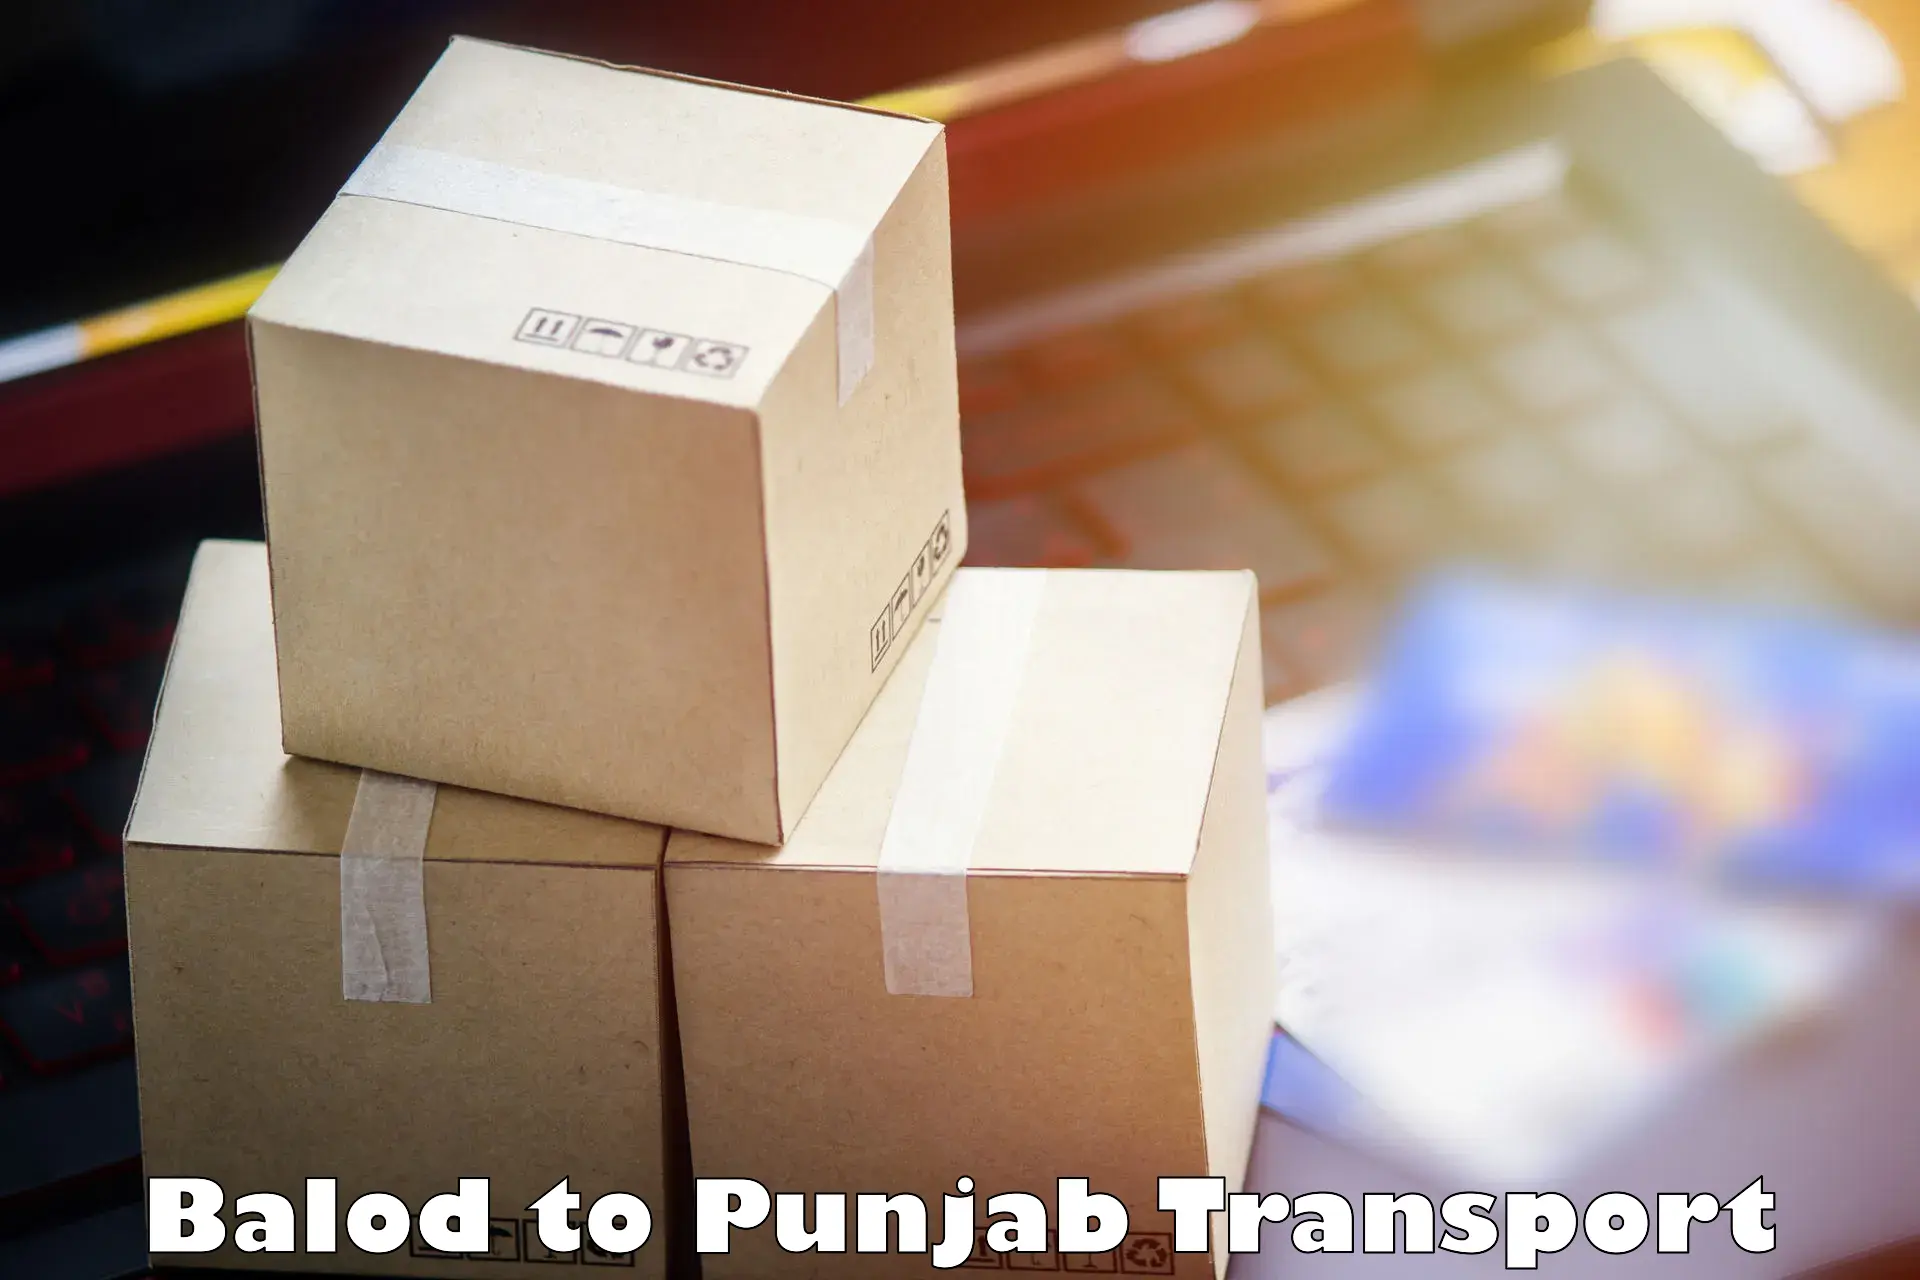 Road transport online services Balod to Sultanpur Lodhi